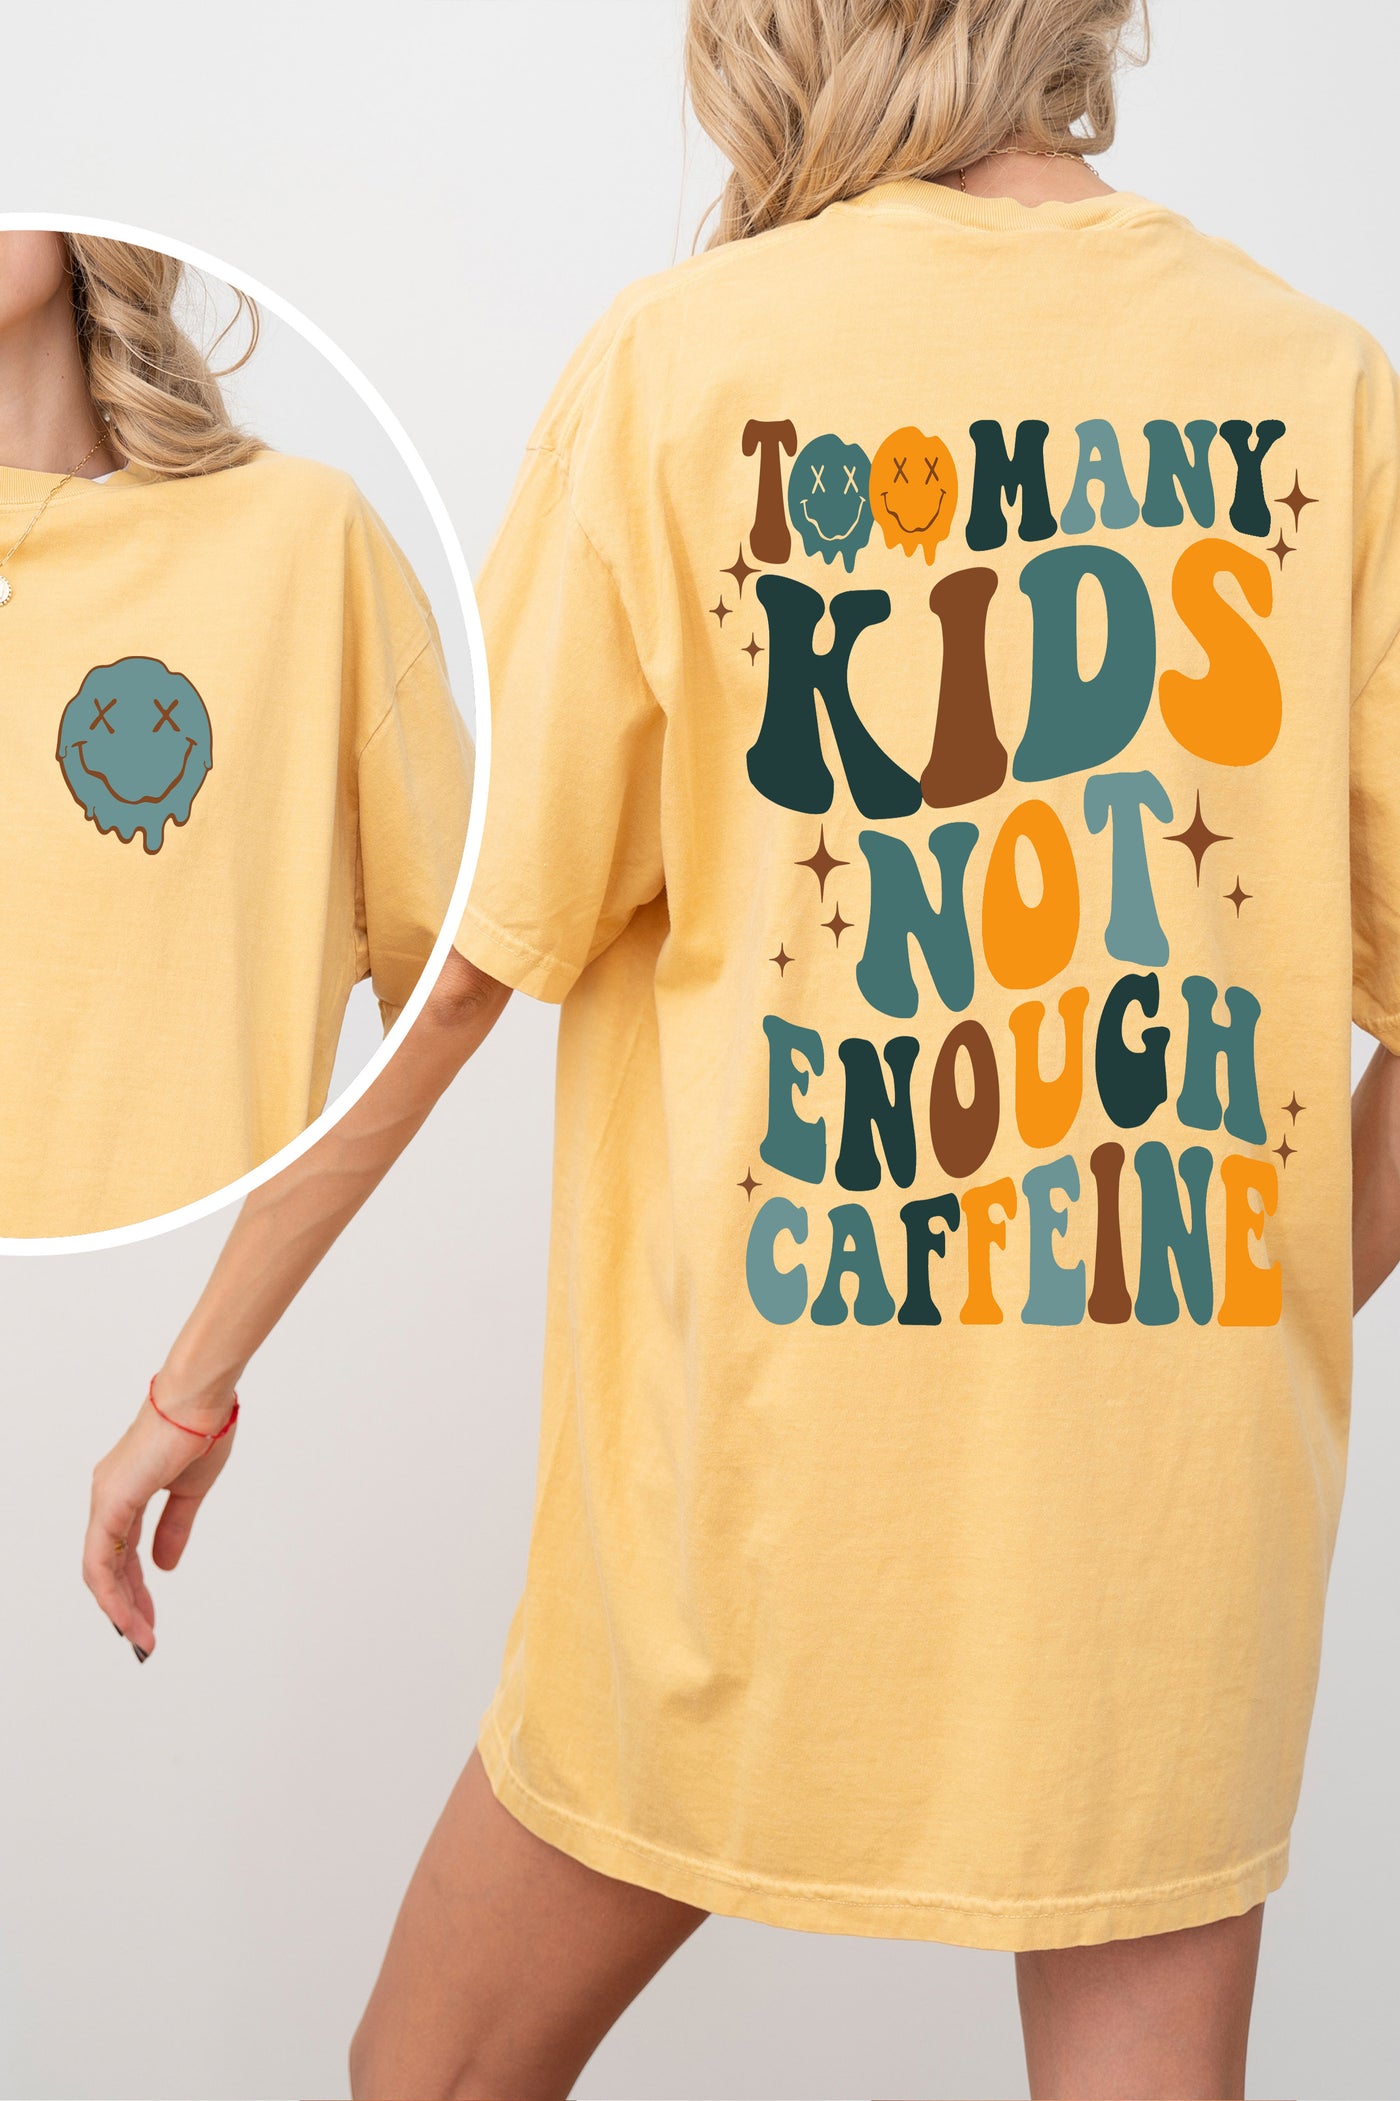 TOO MANY KIDS, NOT ENOUGH CAFFEINE